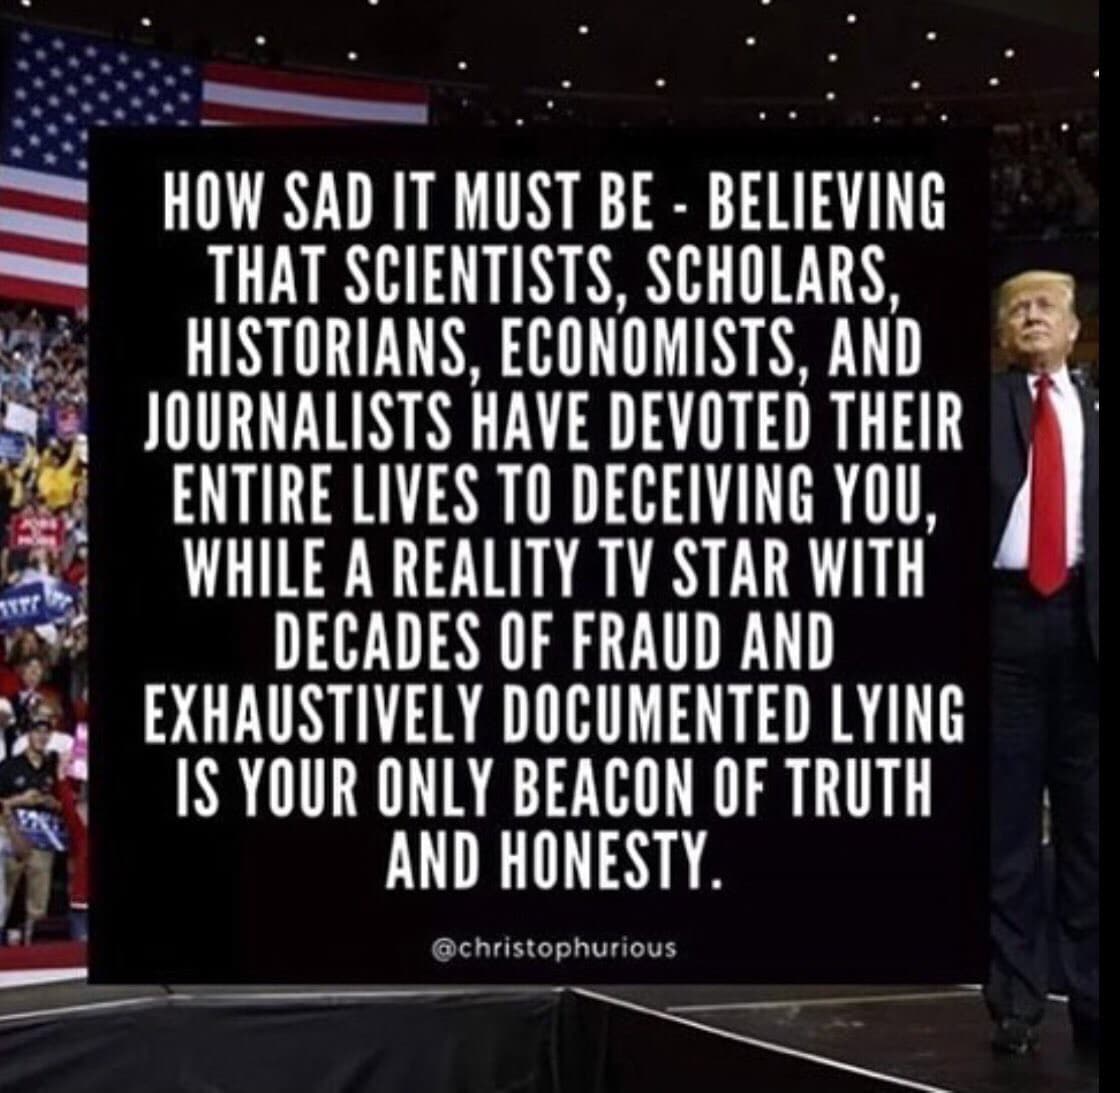 political political-memes political text: HOW SAD IT MUST BE - BELIEVING THAT SCIENTISTS, SCHOLARS, HISTORIANS, ECONOMISTS, AND JOURNALISTS HAVE DEVOTED THEIR ENTIRE LIVES TO DECEIVING YOU, WHILE A REALITY TV STAR WITH DECADES OF FRAUD AND EXHAUSTIVELY DOCUMENTED LYING IS YOUR ONLY BEACON OF TRUTH AND HONESTY. @christophurious 